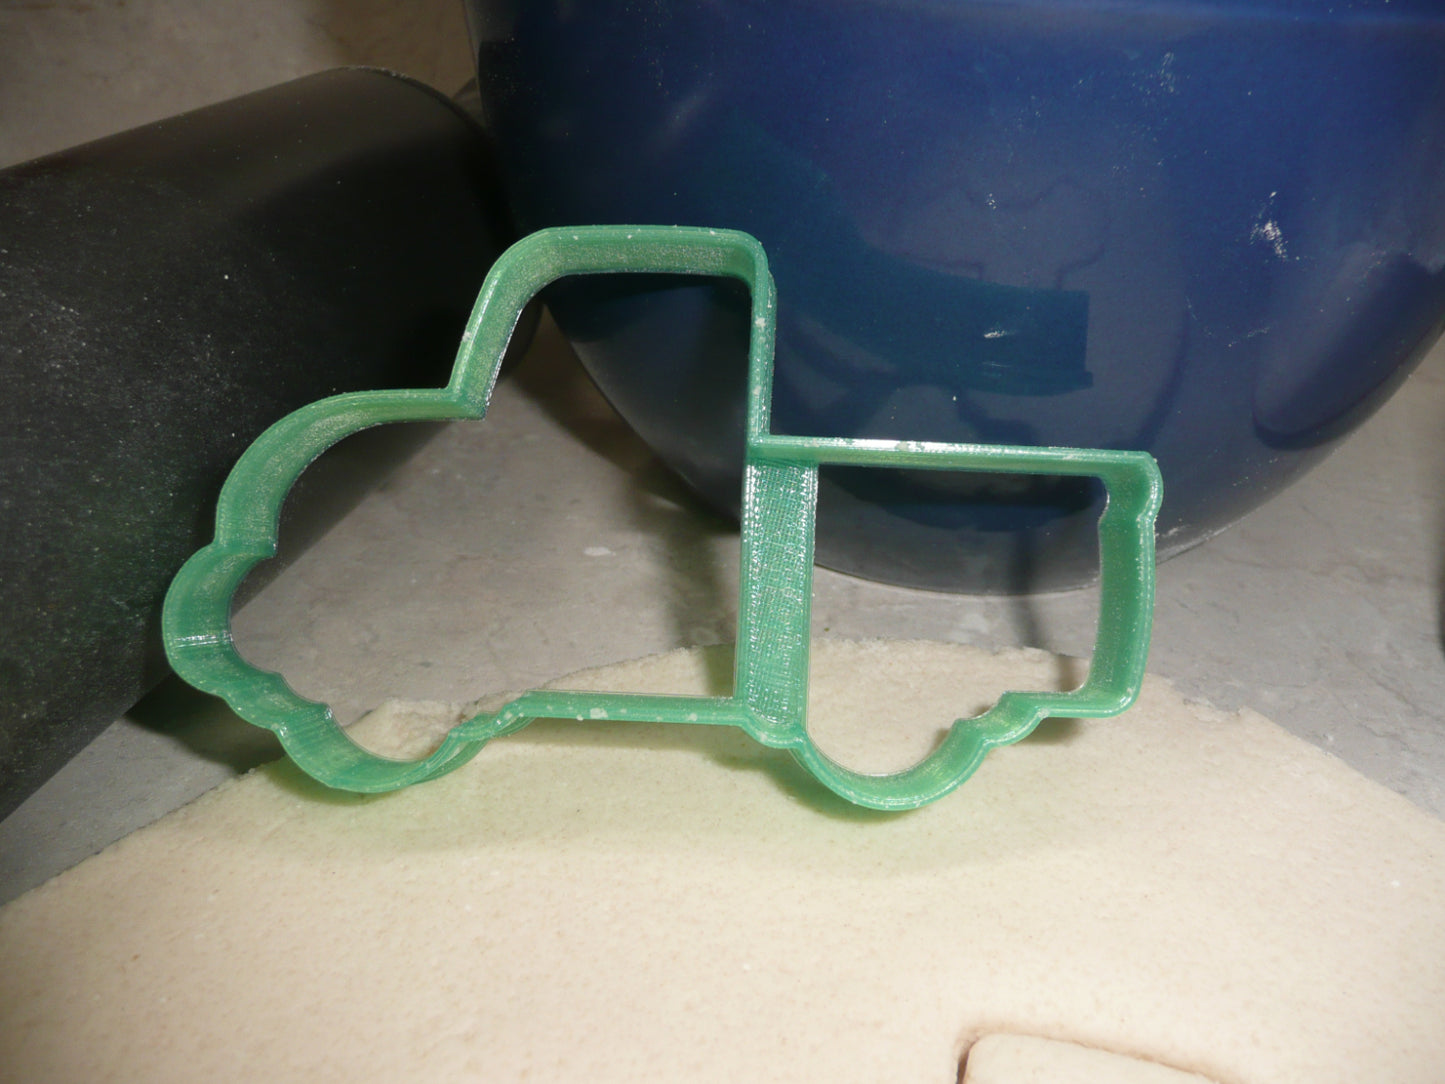 Pickup Truck Heavy Duty Vehicle Outline Cookie Cutter Made In USA PR4926